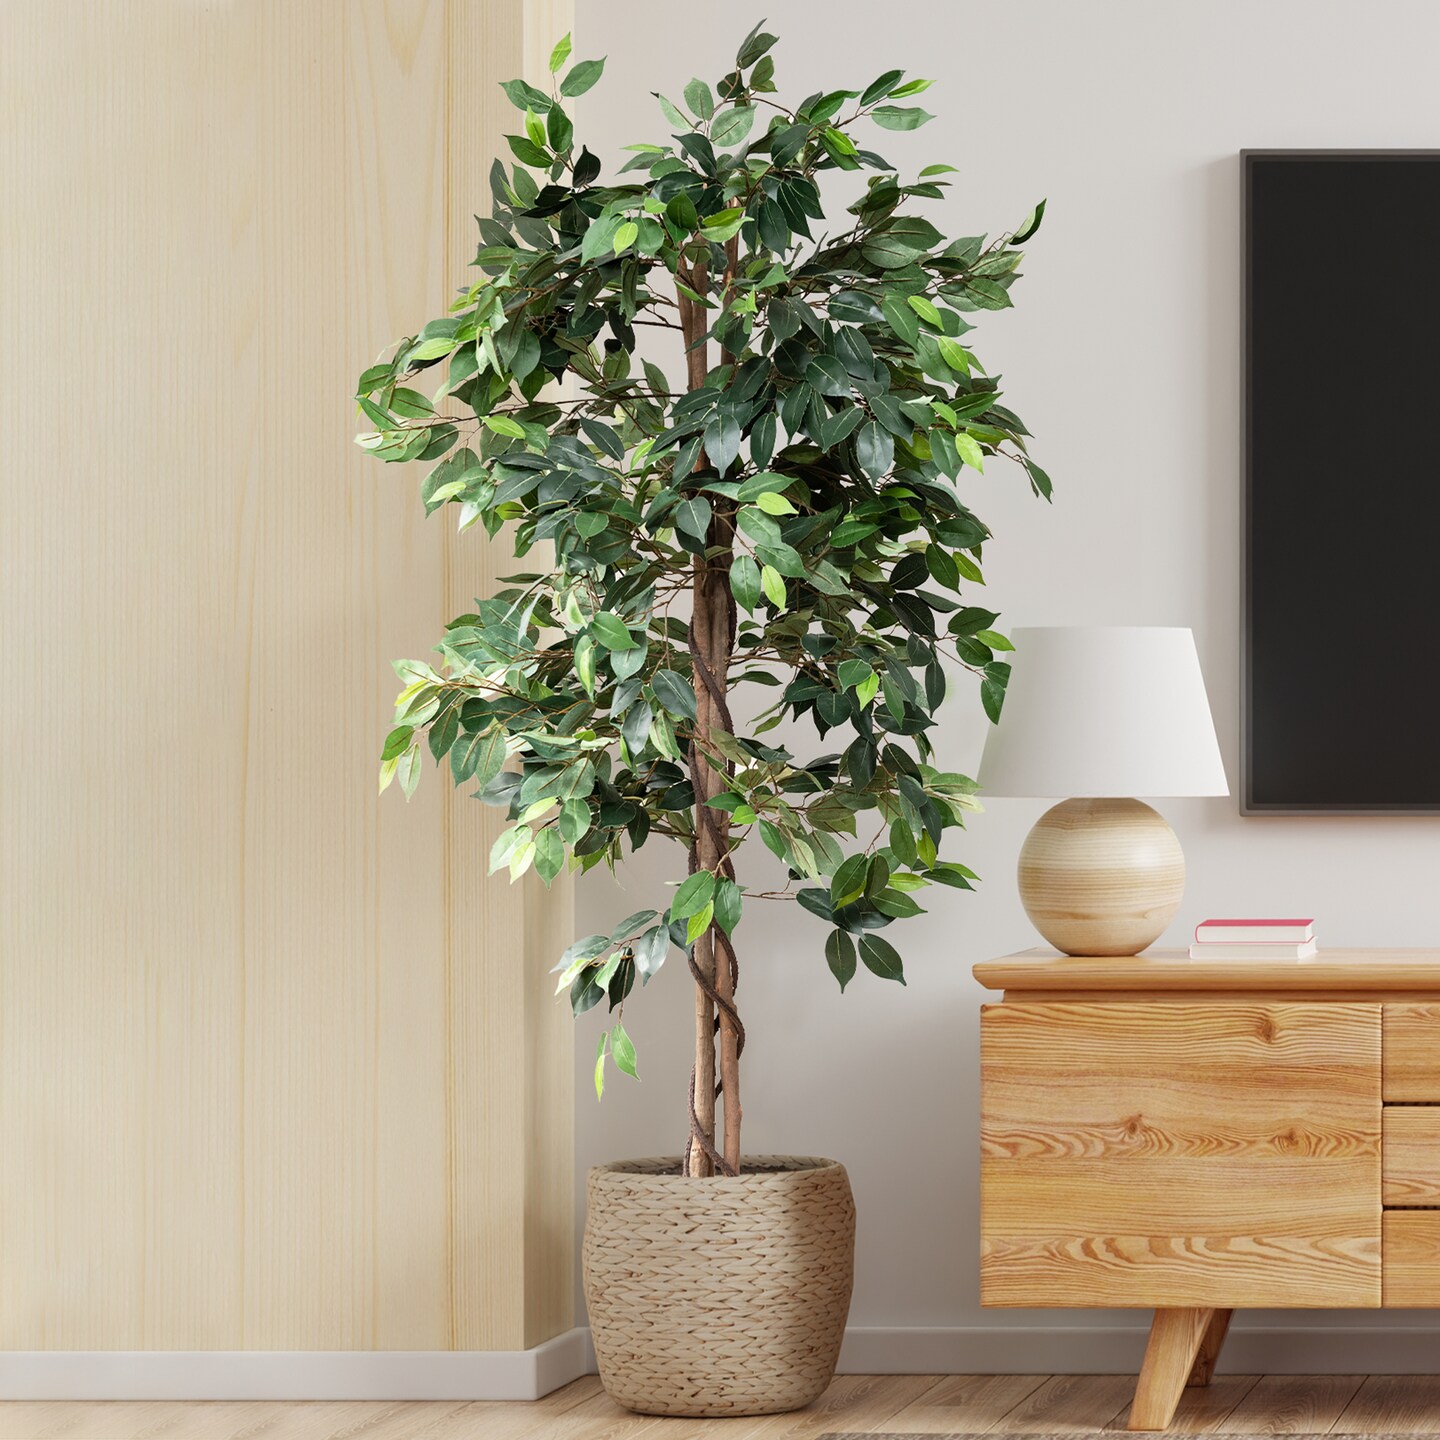 These 7 Beautiful Indoor Plants Will Add An Earthy Vibe To Your Winter Home  Decor This Season